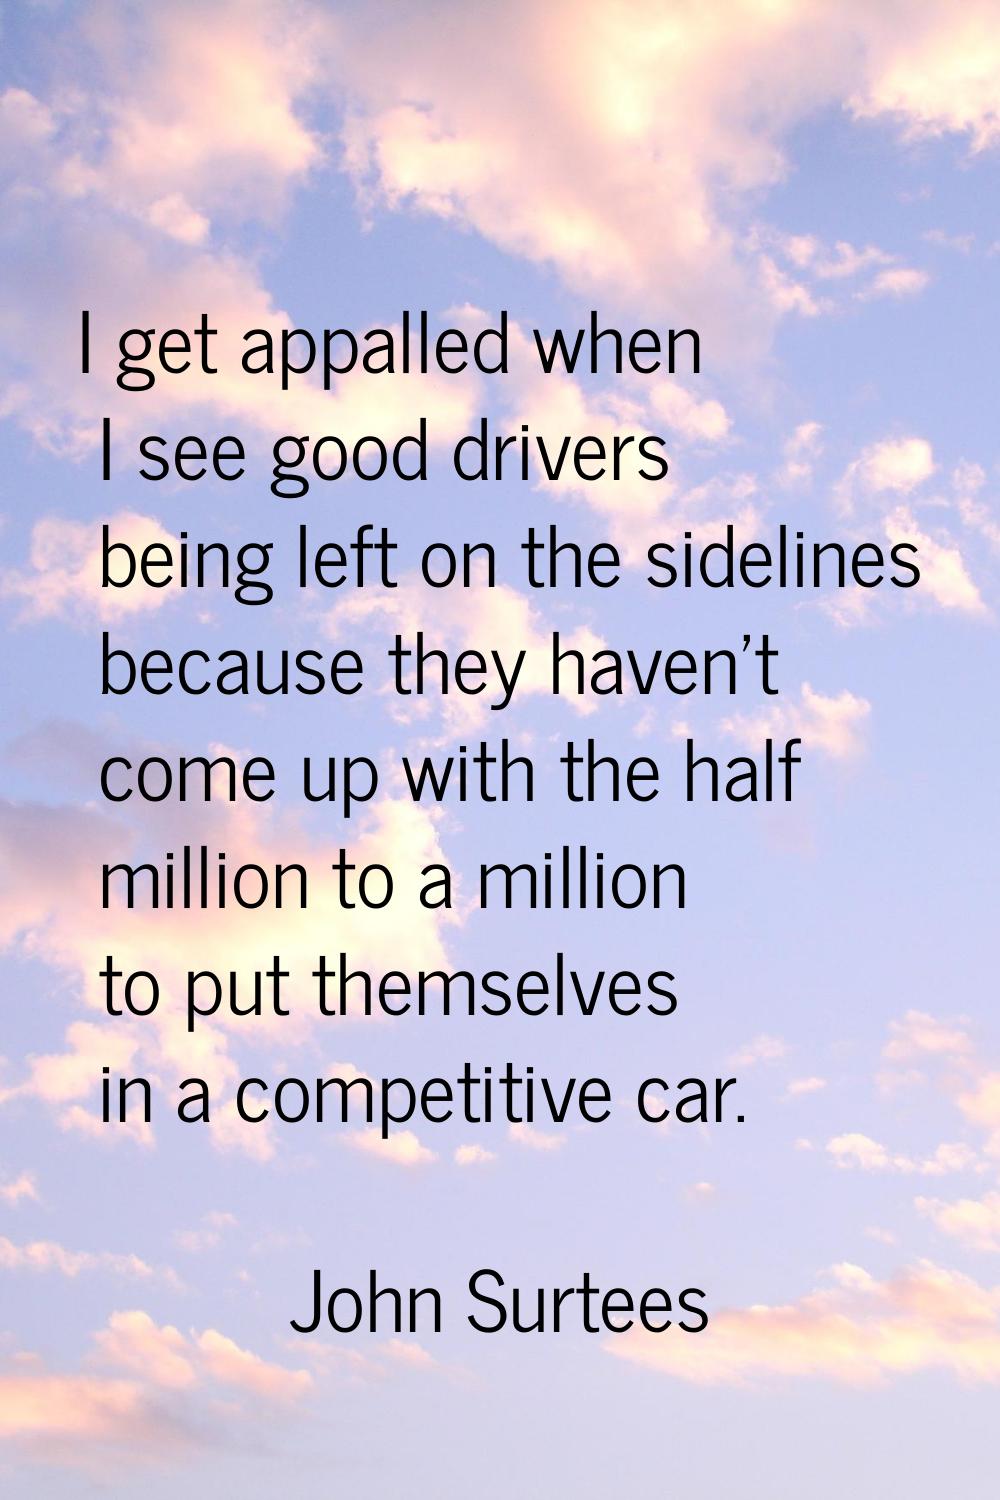 I get appalled when I see good drivers being left on the sidelines because they haven't come up wit